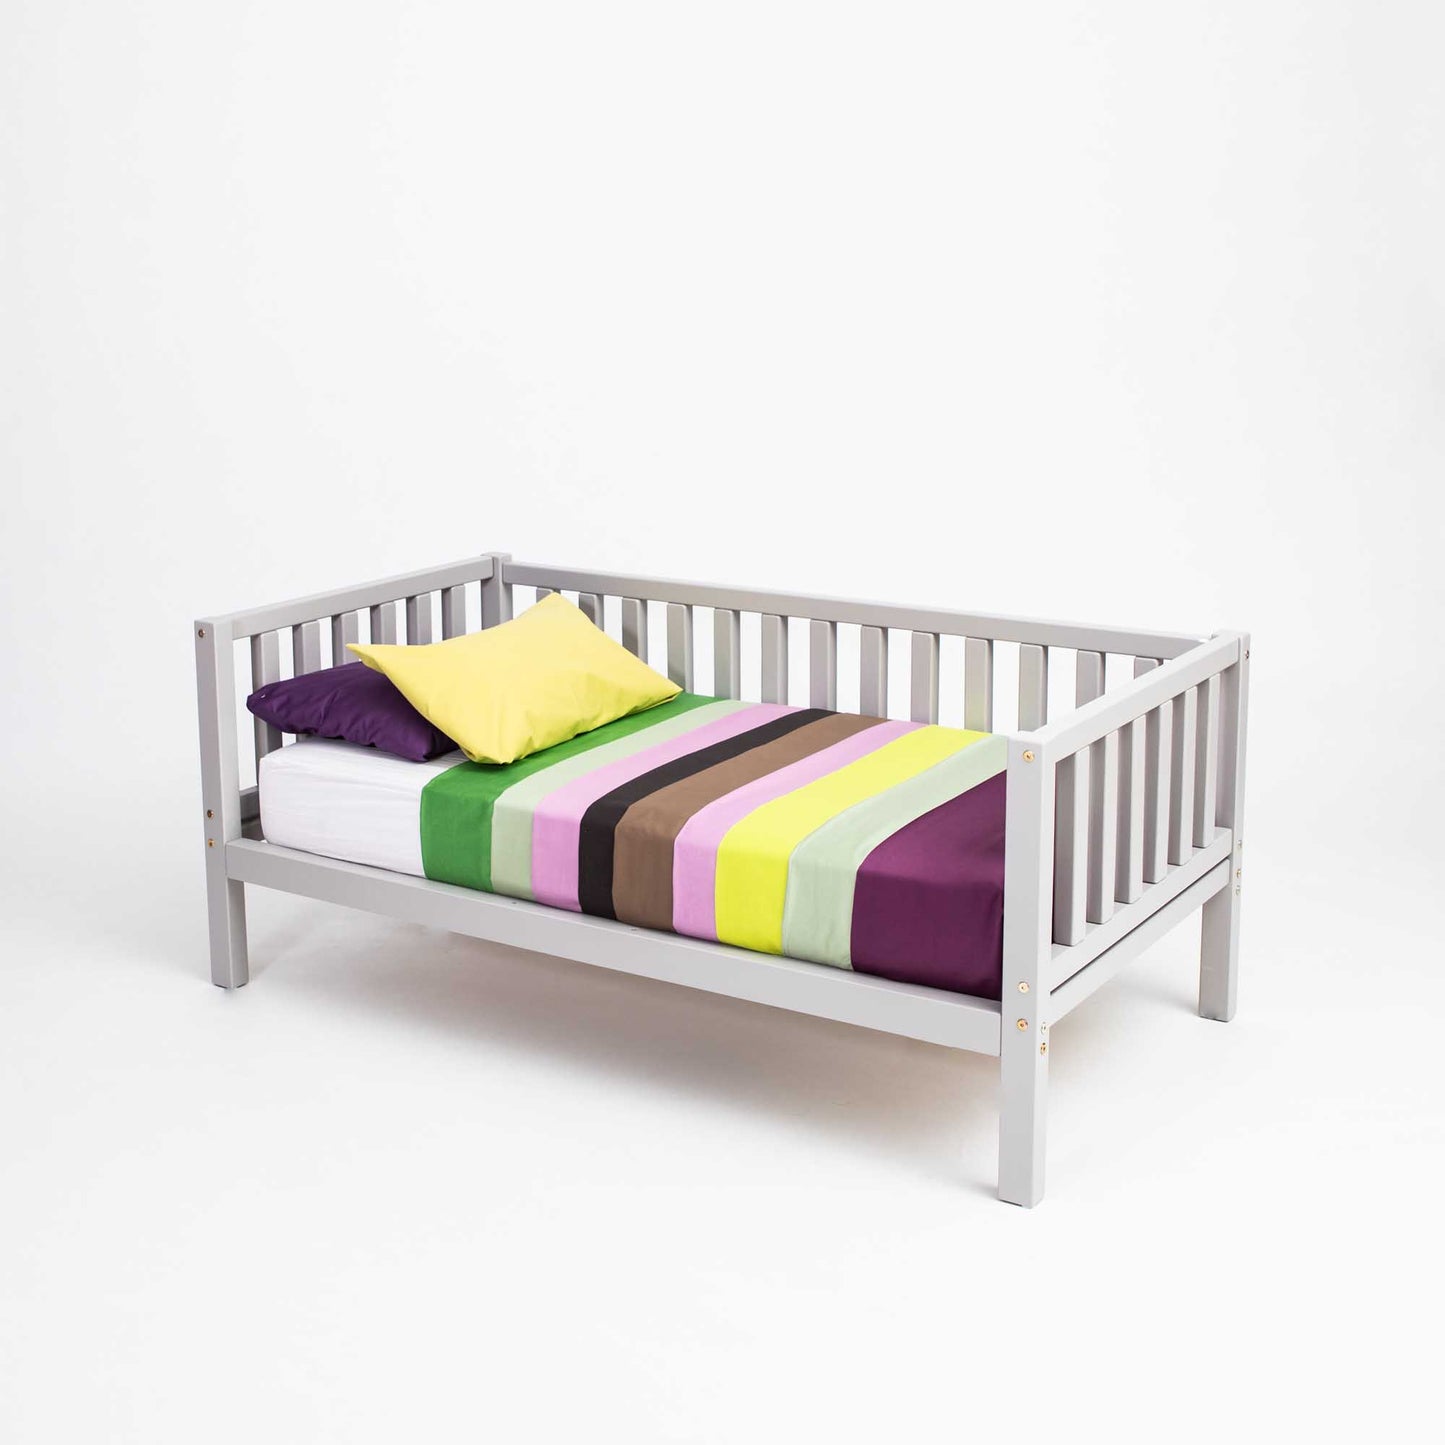 A Sweet Home From Wood Montessori-inspired children's bed with colorful striped sheets made of solid wood, specifically the Kids' platform bed on legs with 3-sided rails.